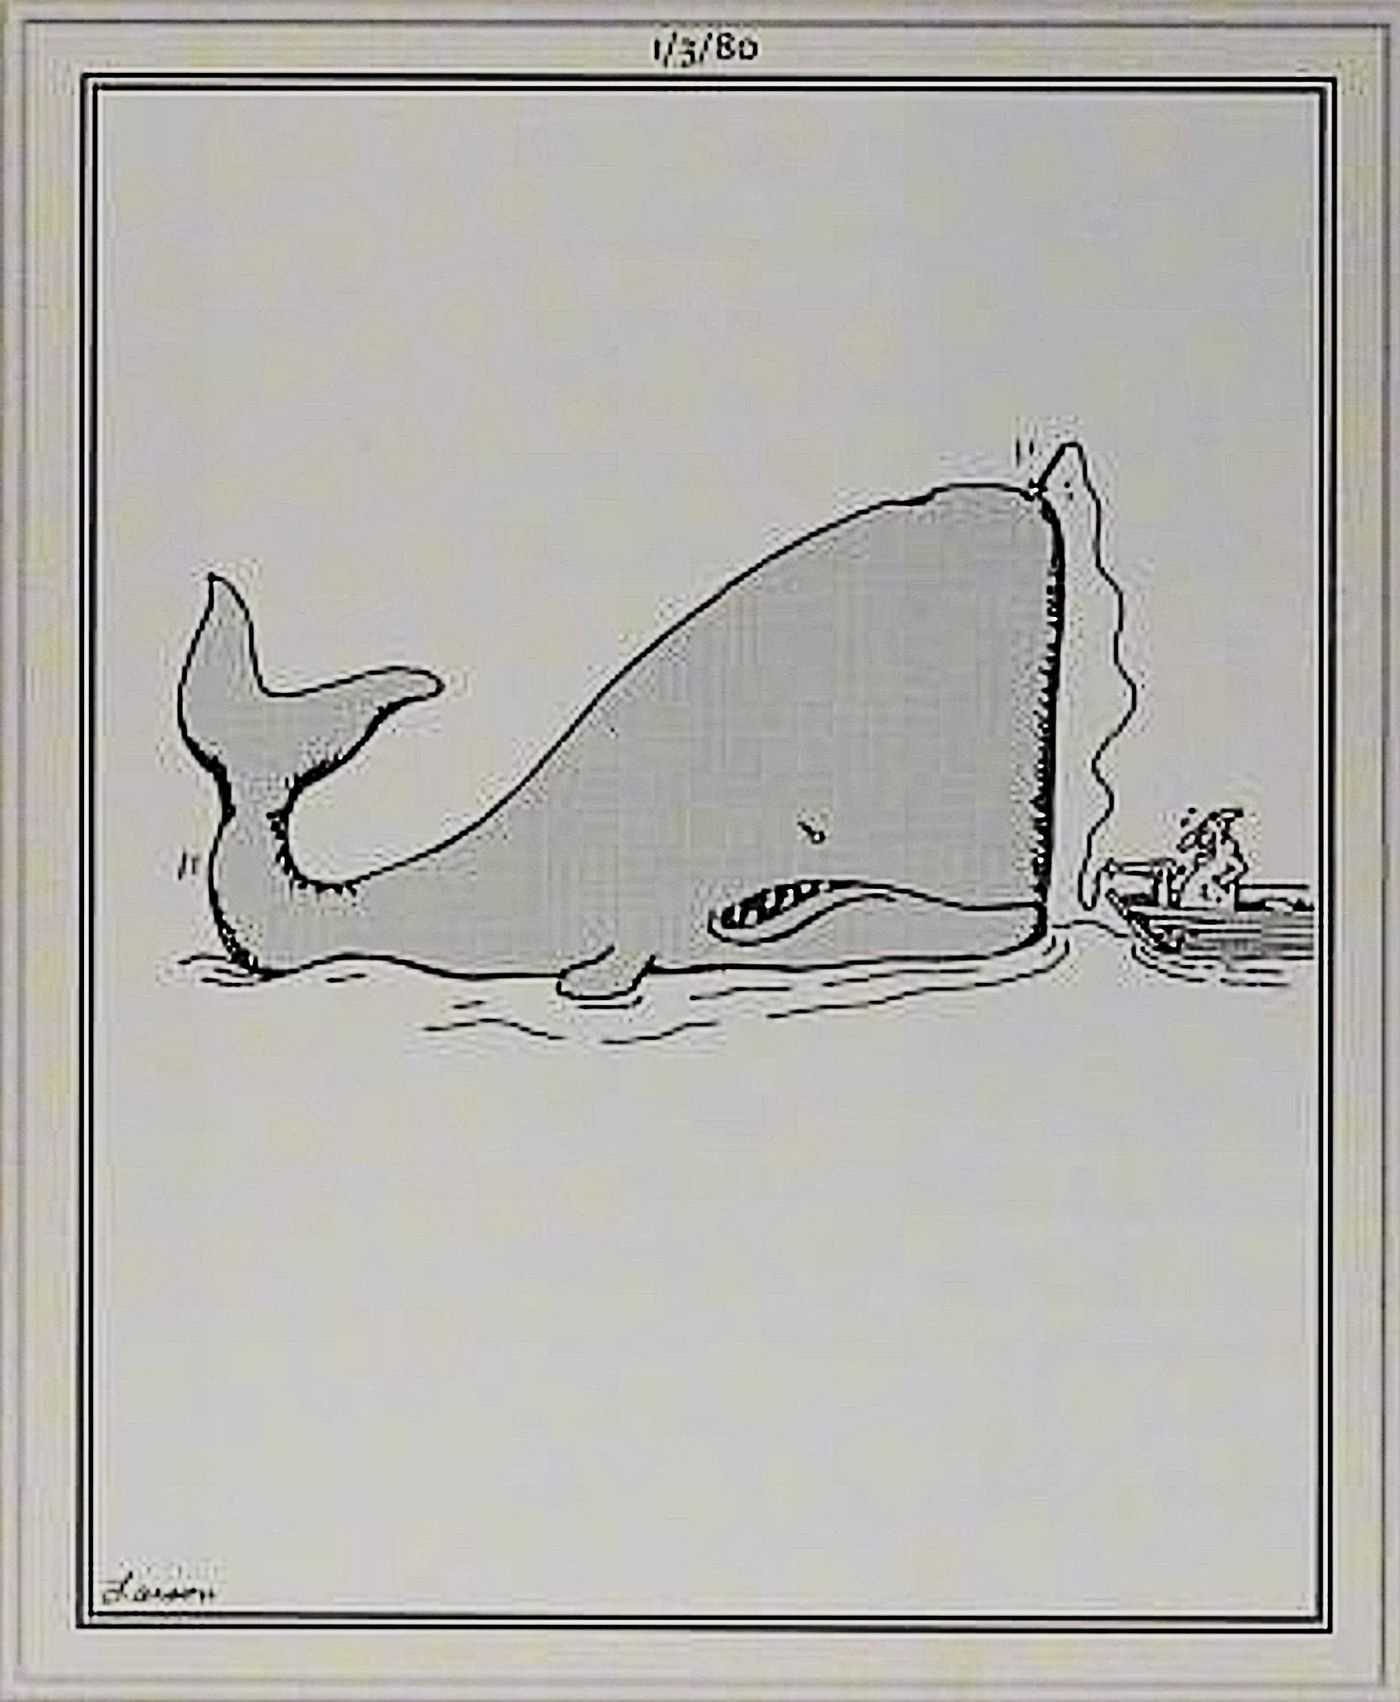 The Far Side, fisherman harpoons a whale that is way out of his league